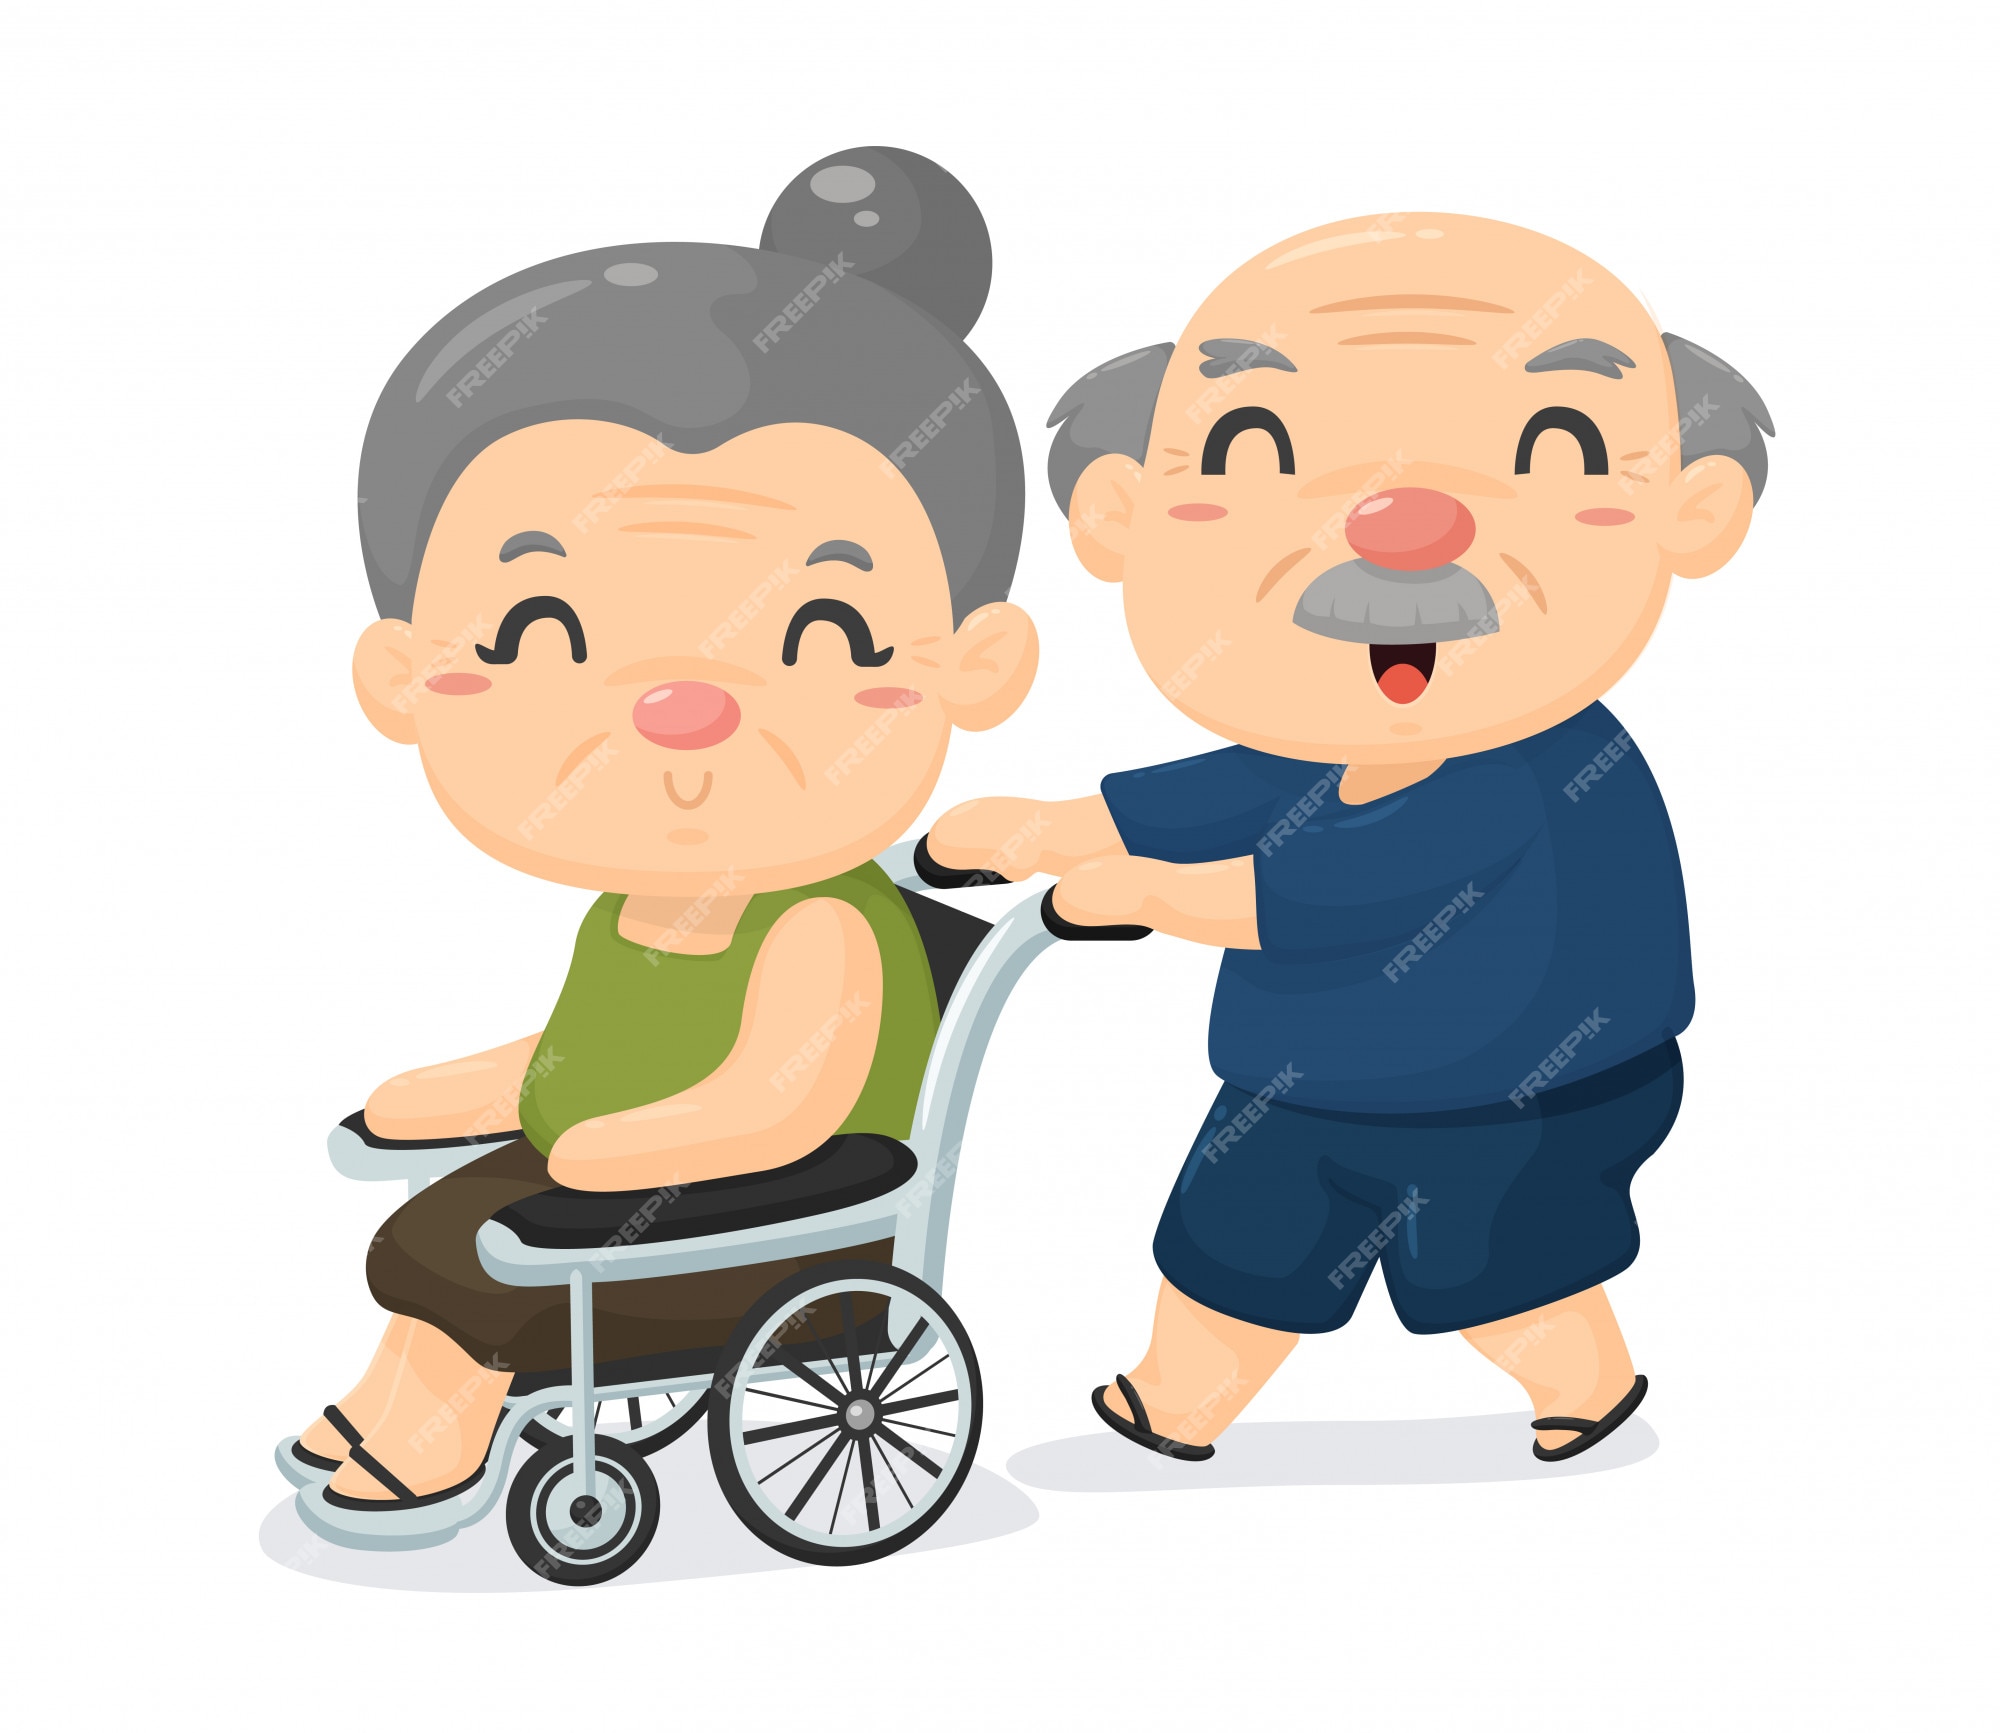 Premium Vector | Elderly society cartoon, old age lovers care for each  other when sick.